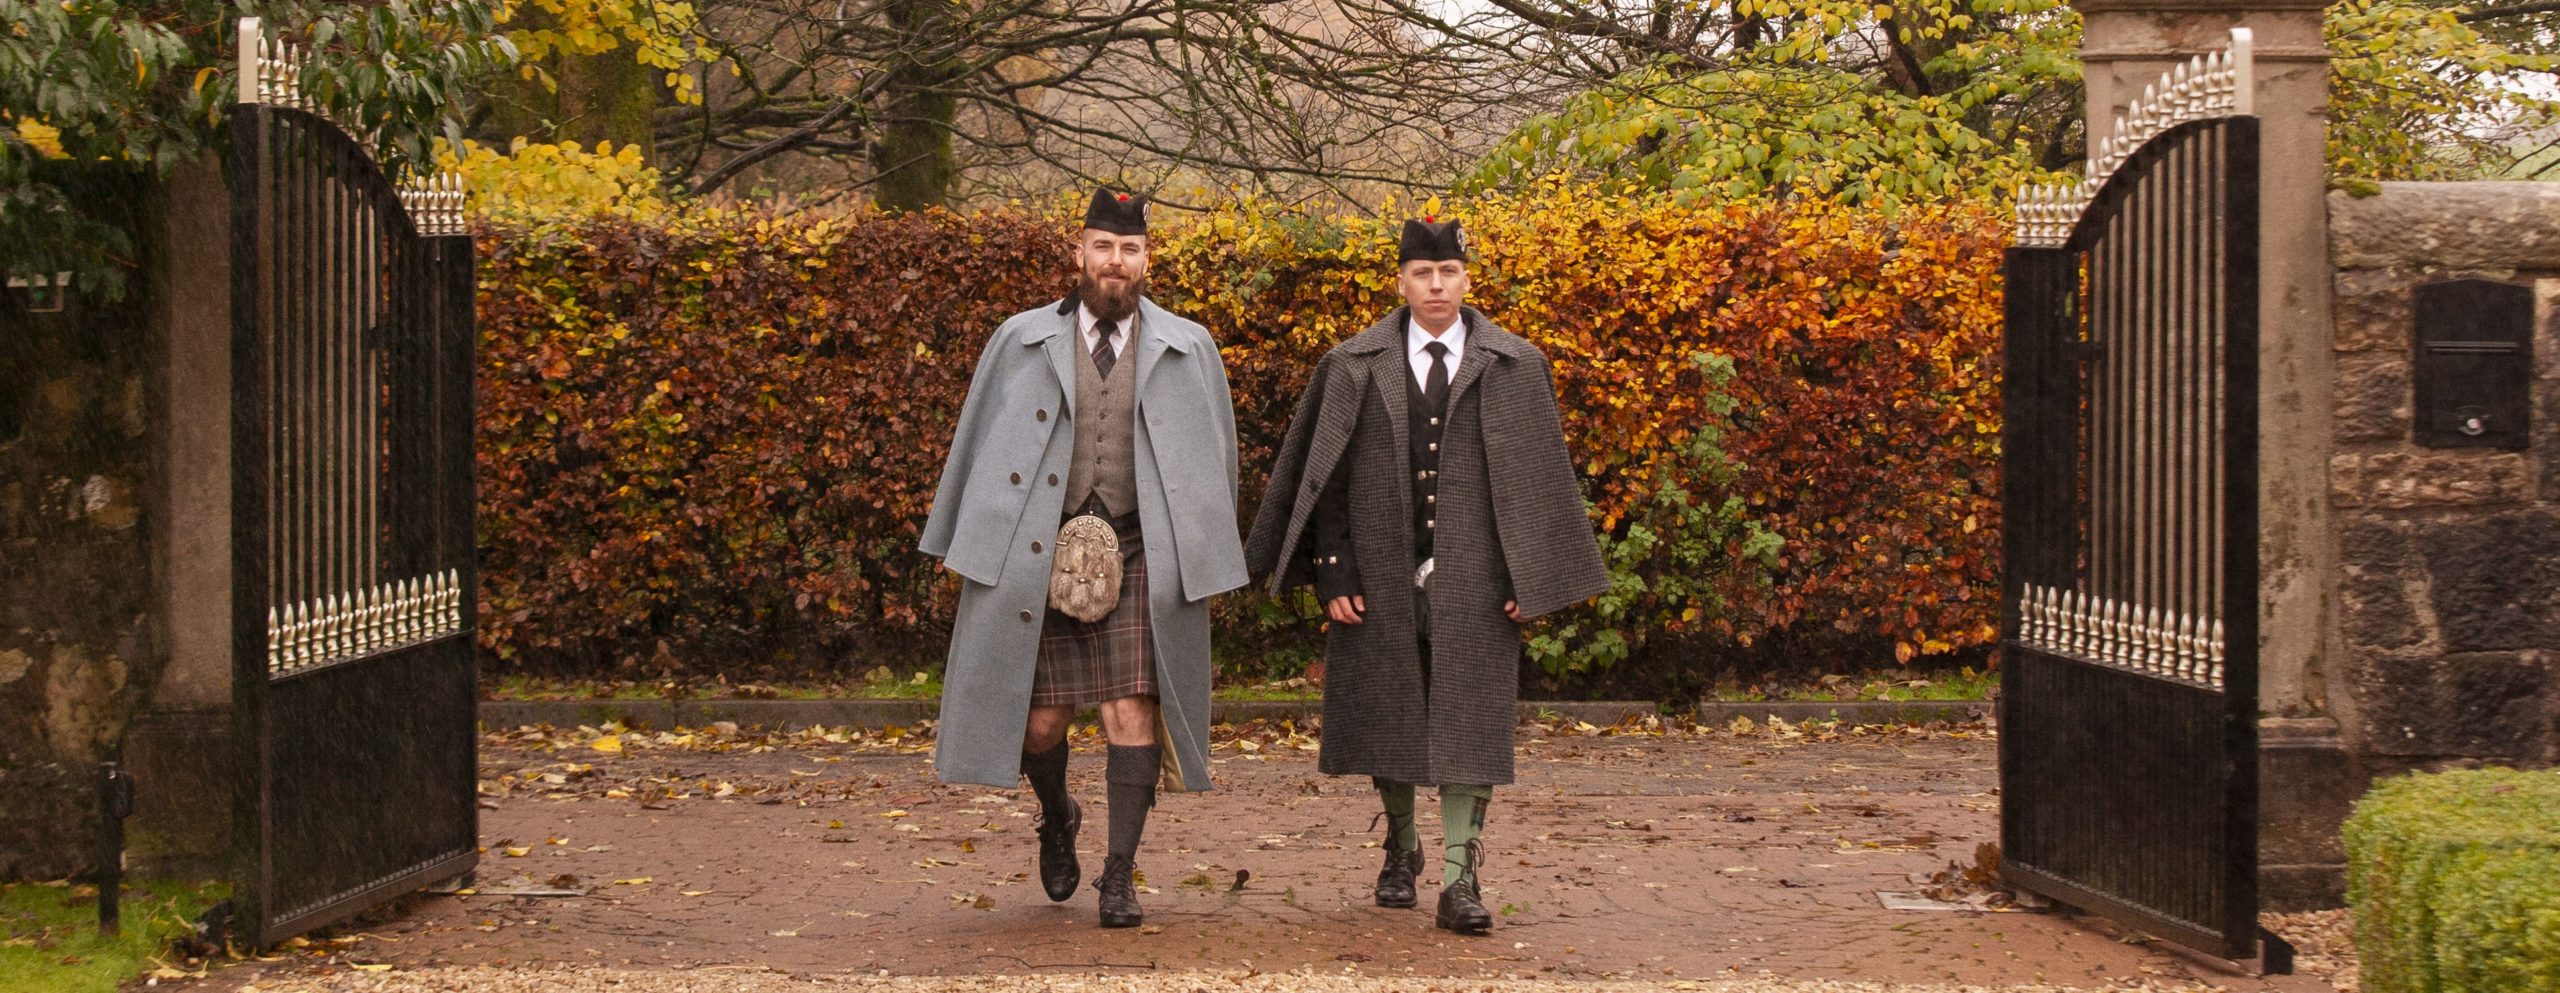 2 people walking in front of gates wearing tweed capes